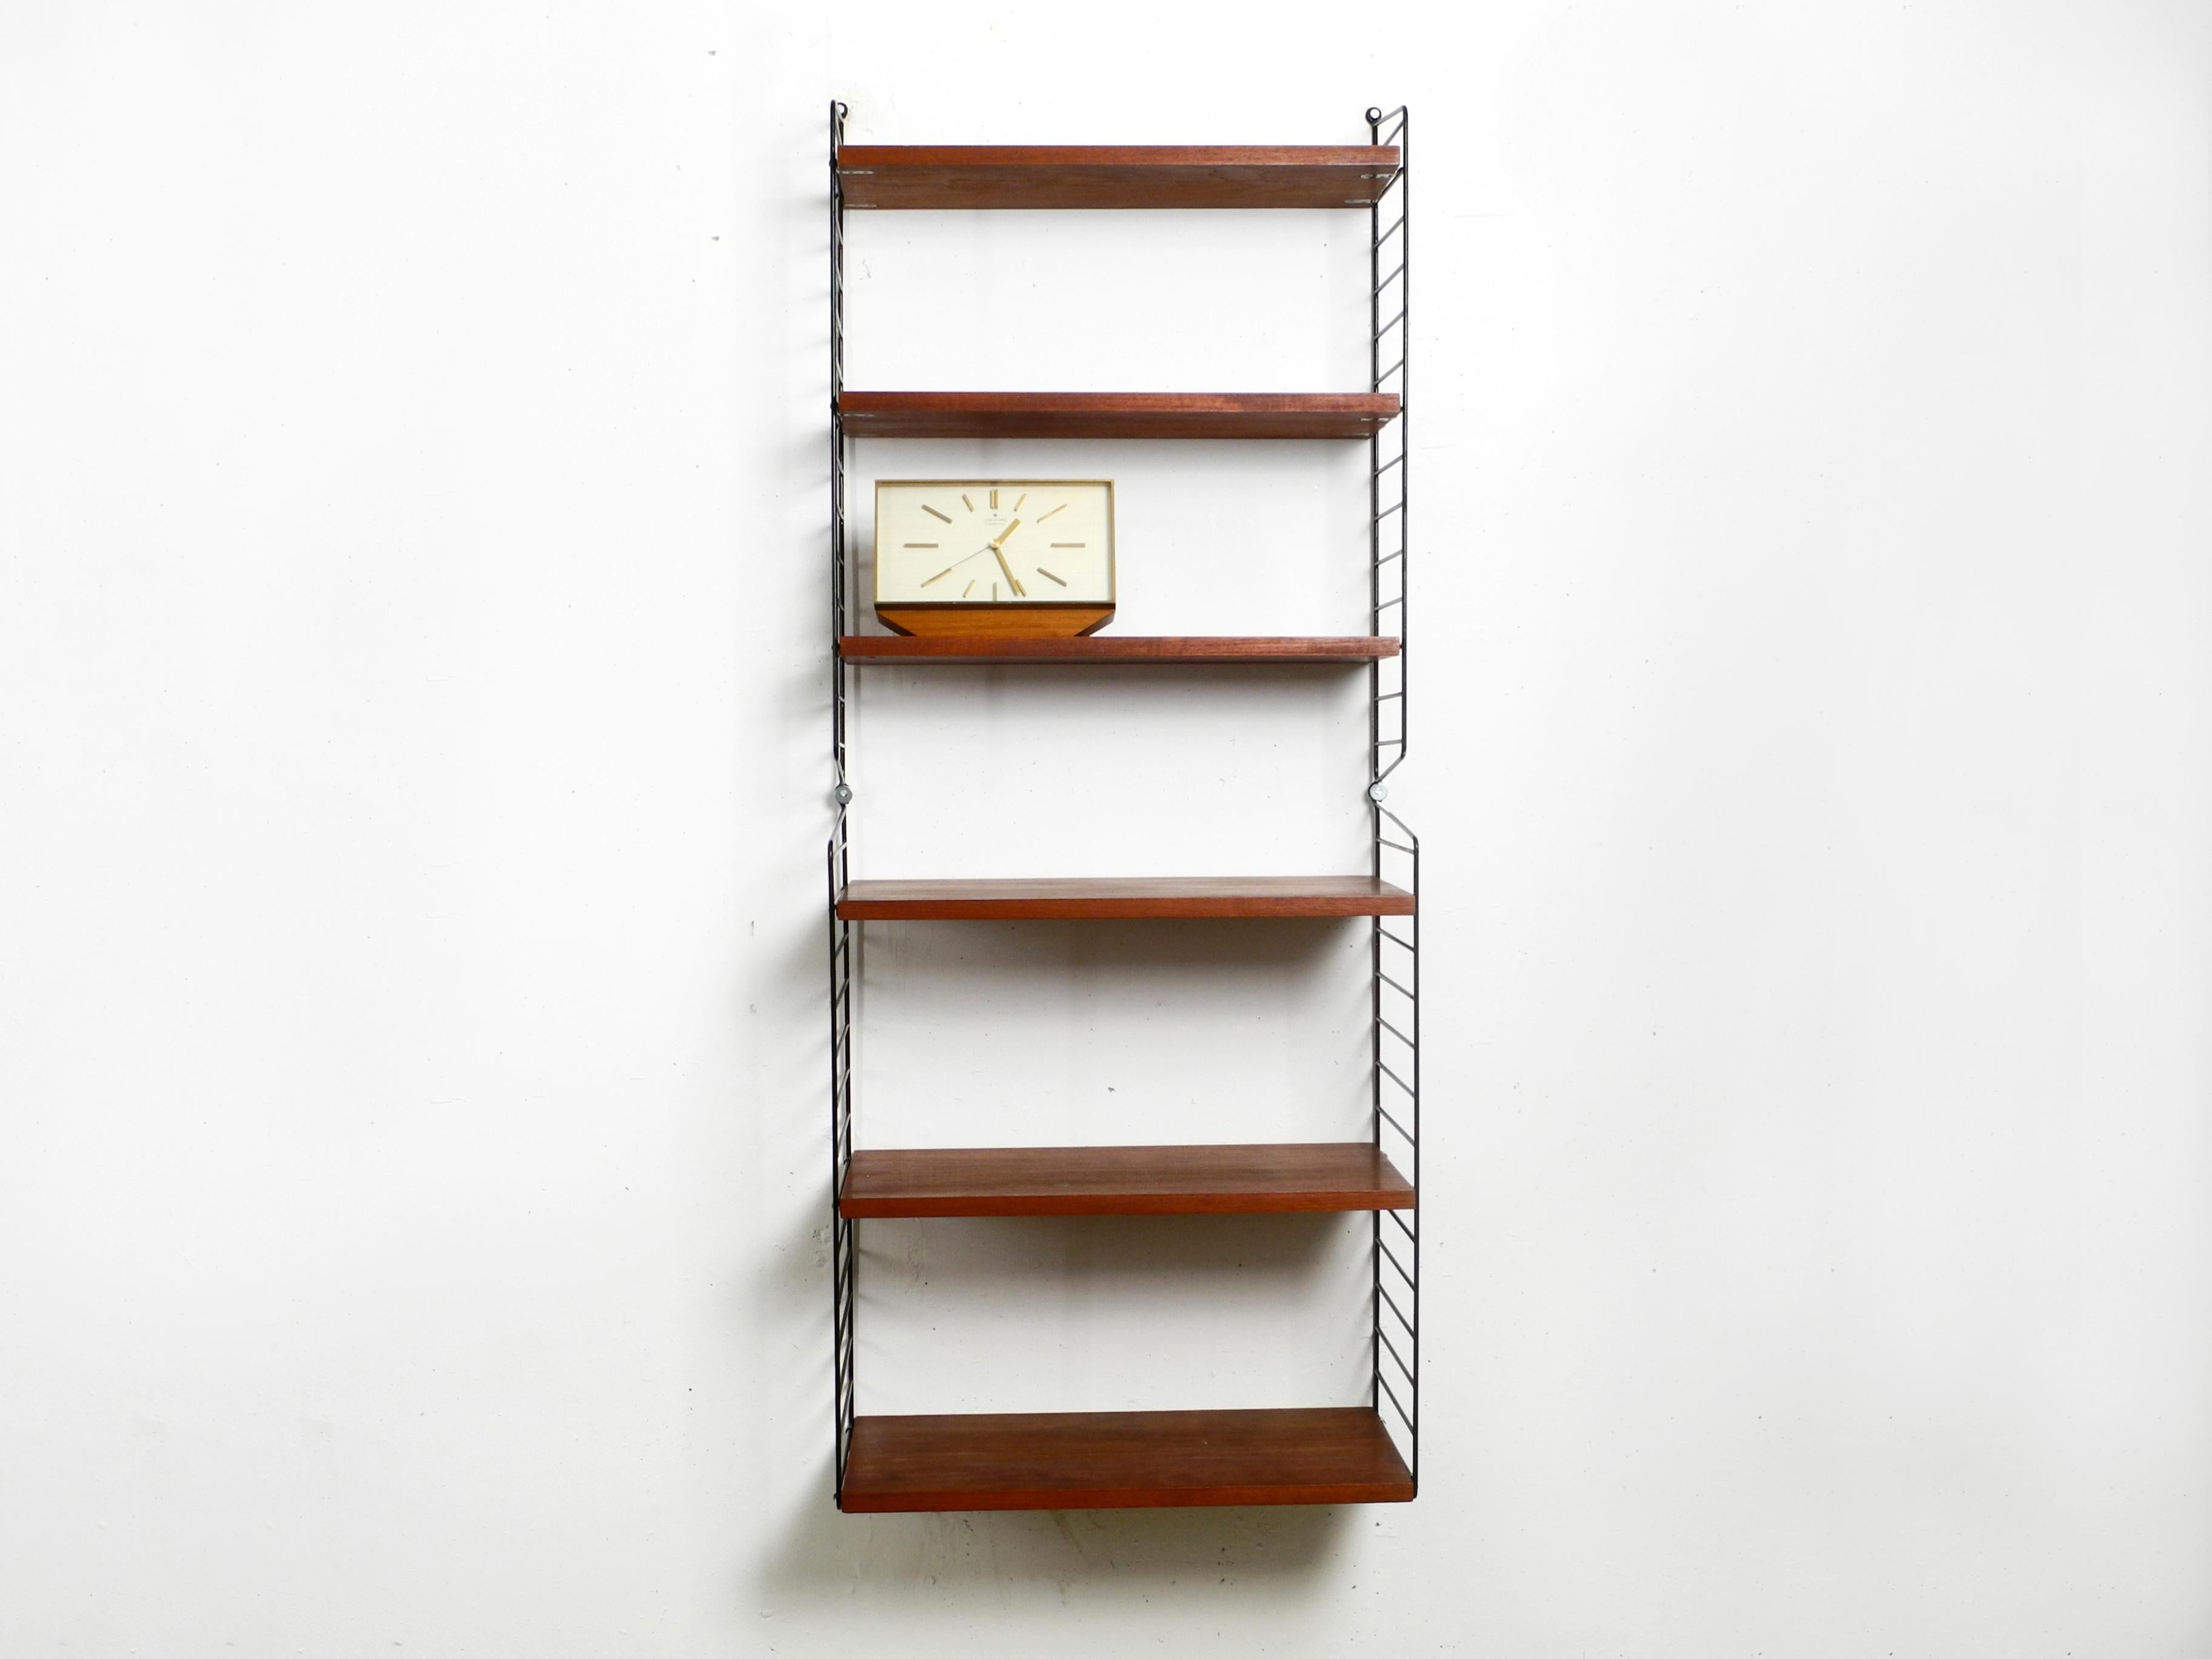 Original narrow 1960s Nisse Strinning shelf. This string shelf has dark teak shelves with 20cm and 30cm depth. Made in Sweden. 
Two ladders and 3 boards have a depth of 20 cm, two ladders and three boards have a depth of 30 cm.
All shelves are 58 cm